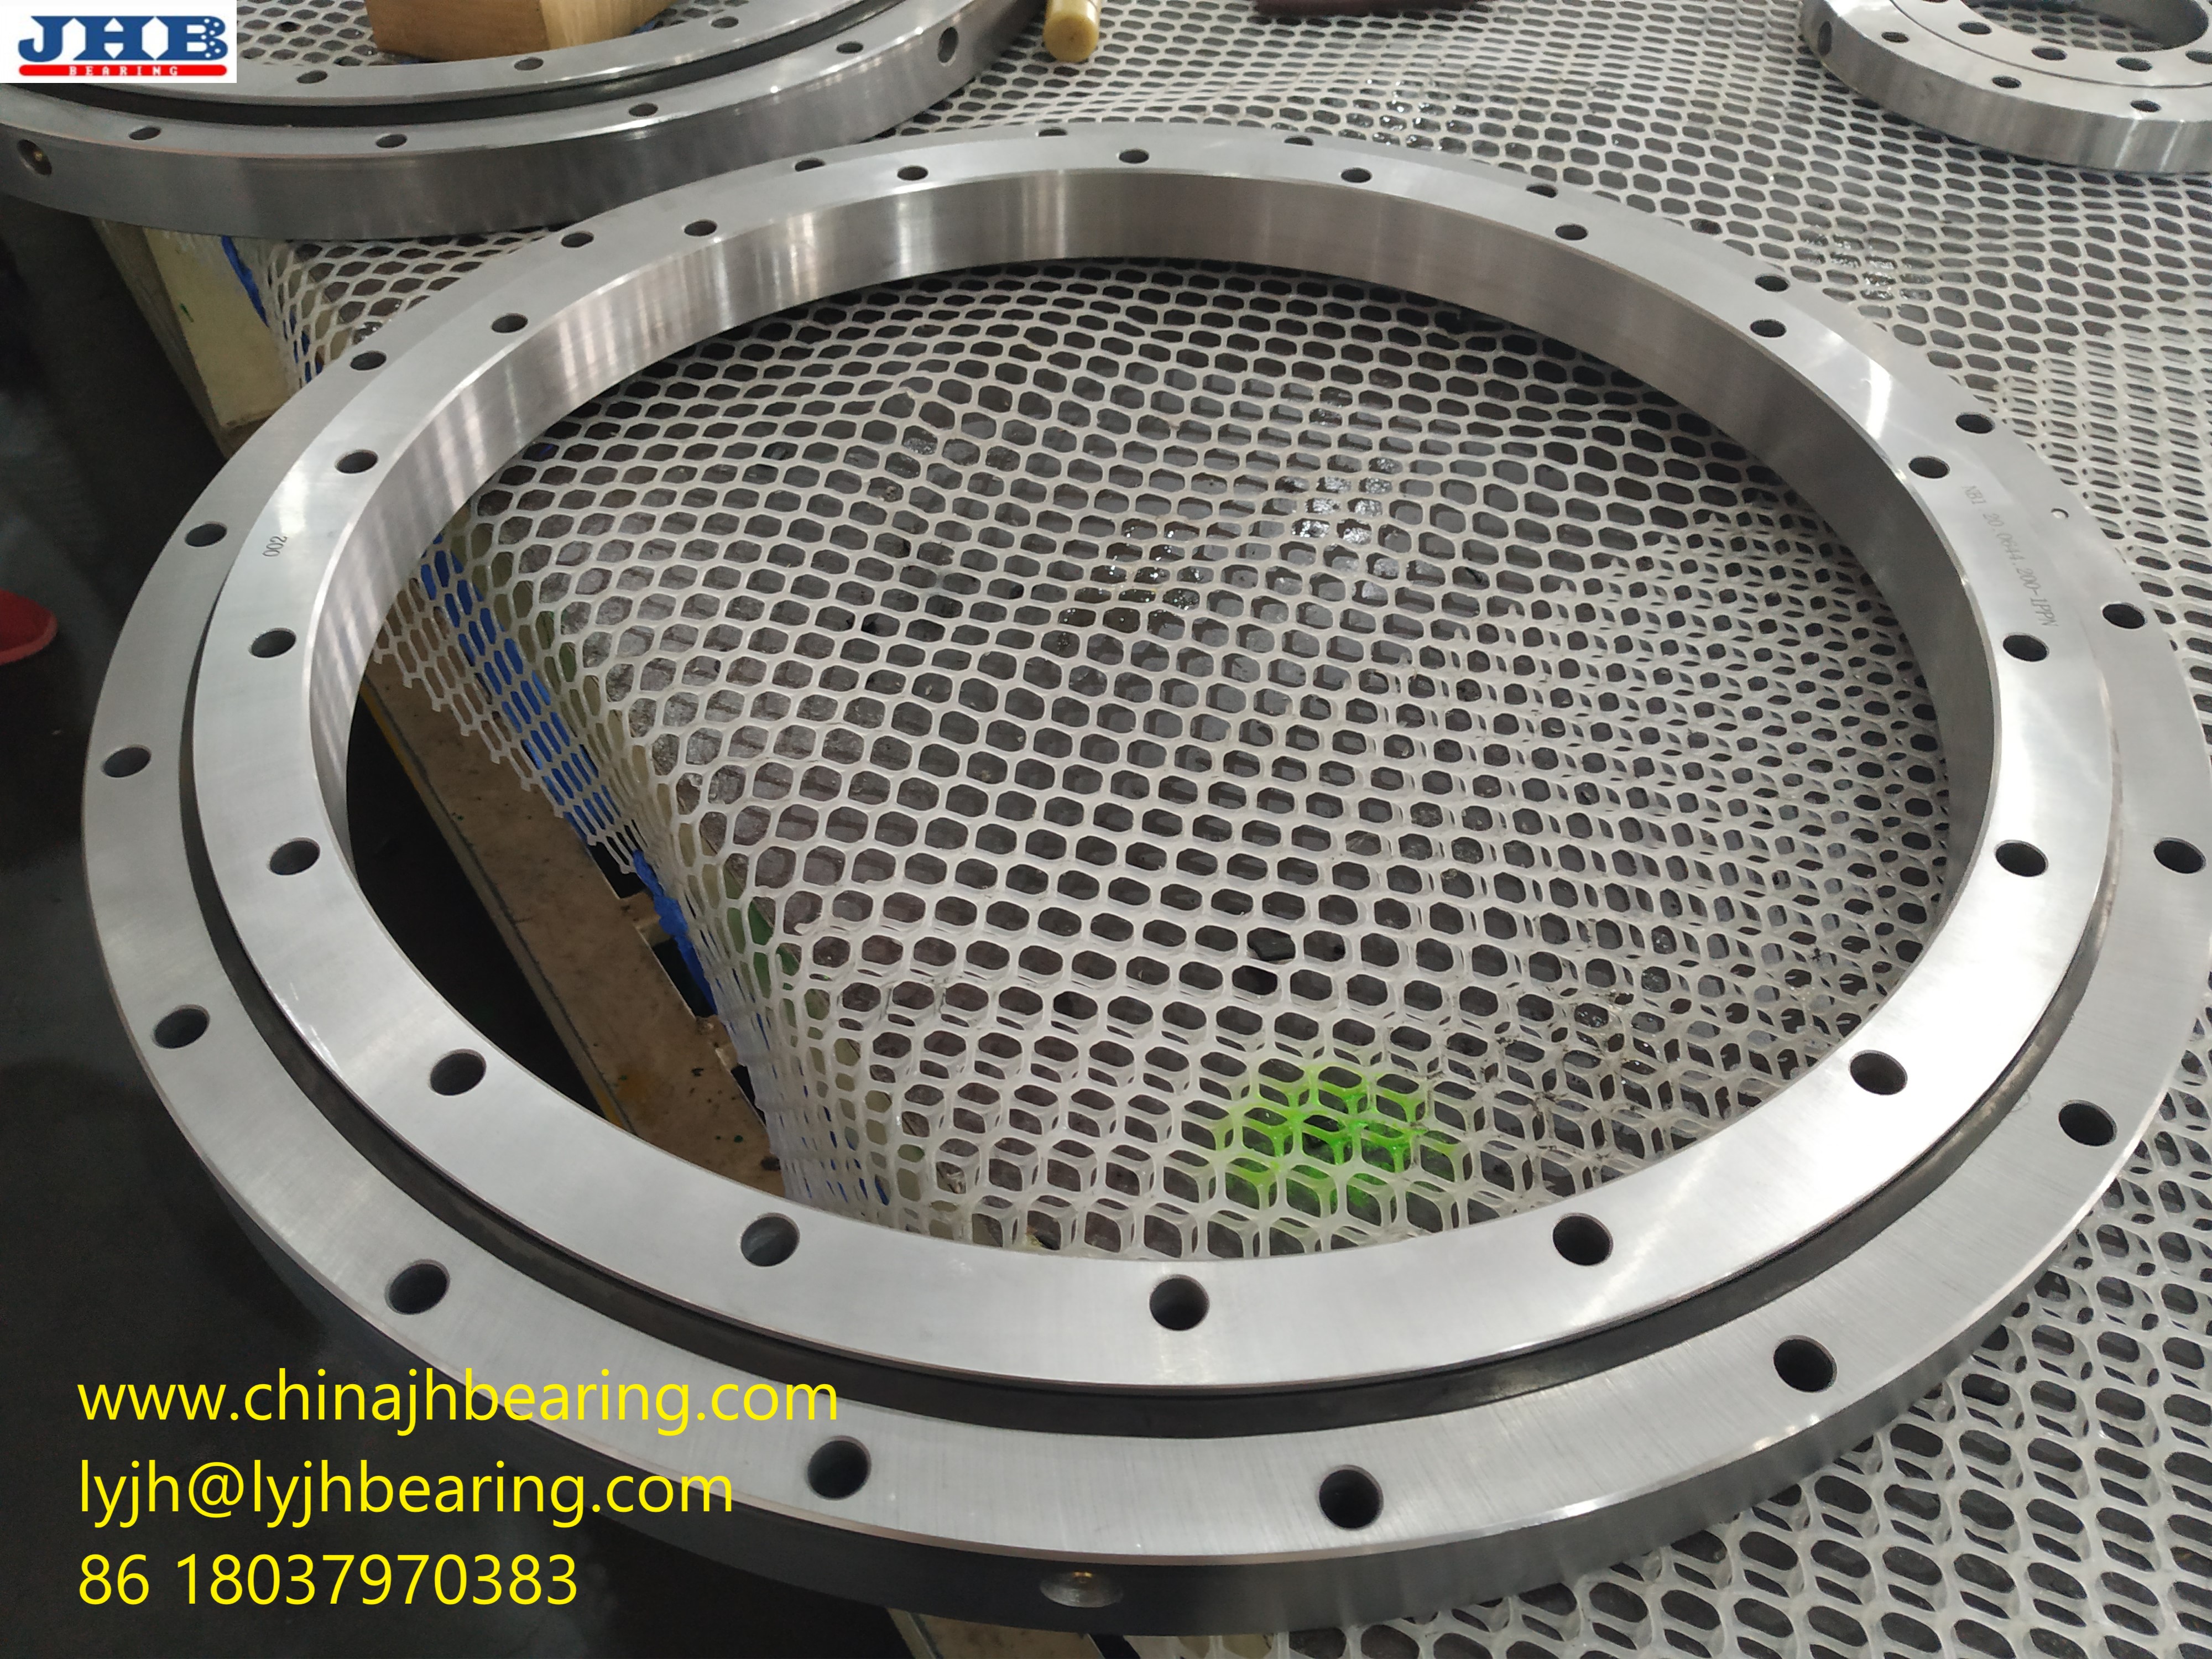 slewing bearing RKS.061.20 0744 size 838.8x672x56mm with external teeth for Casting Equipment